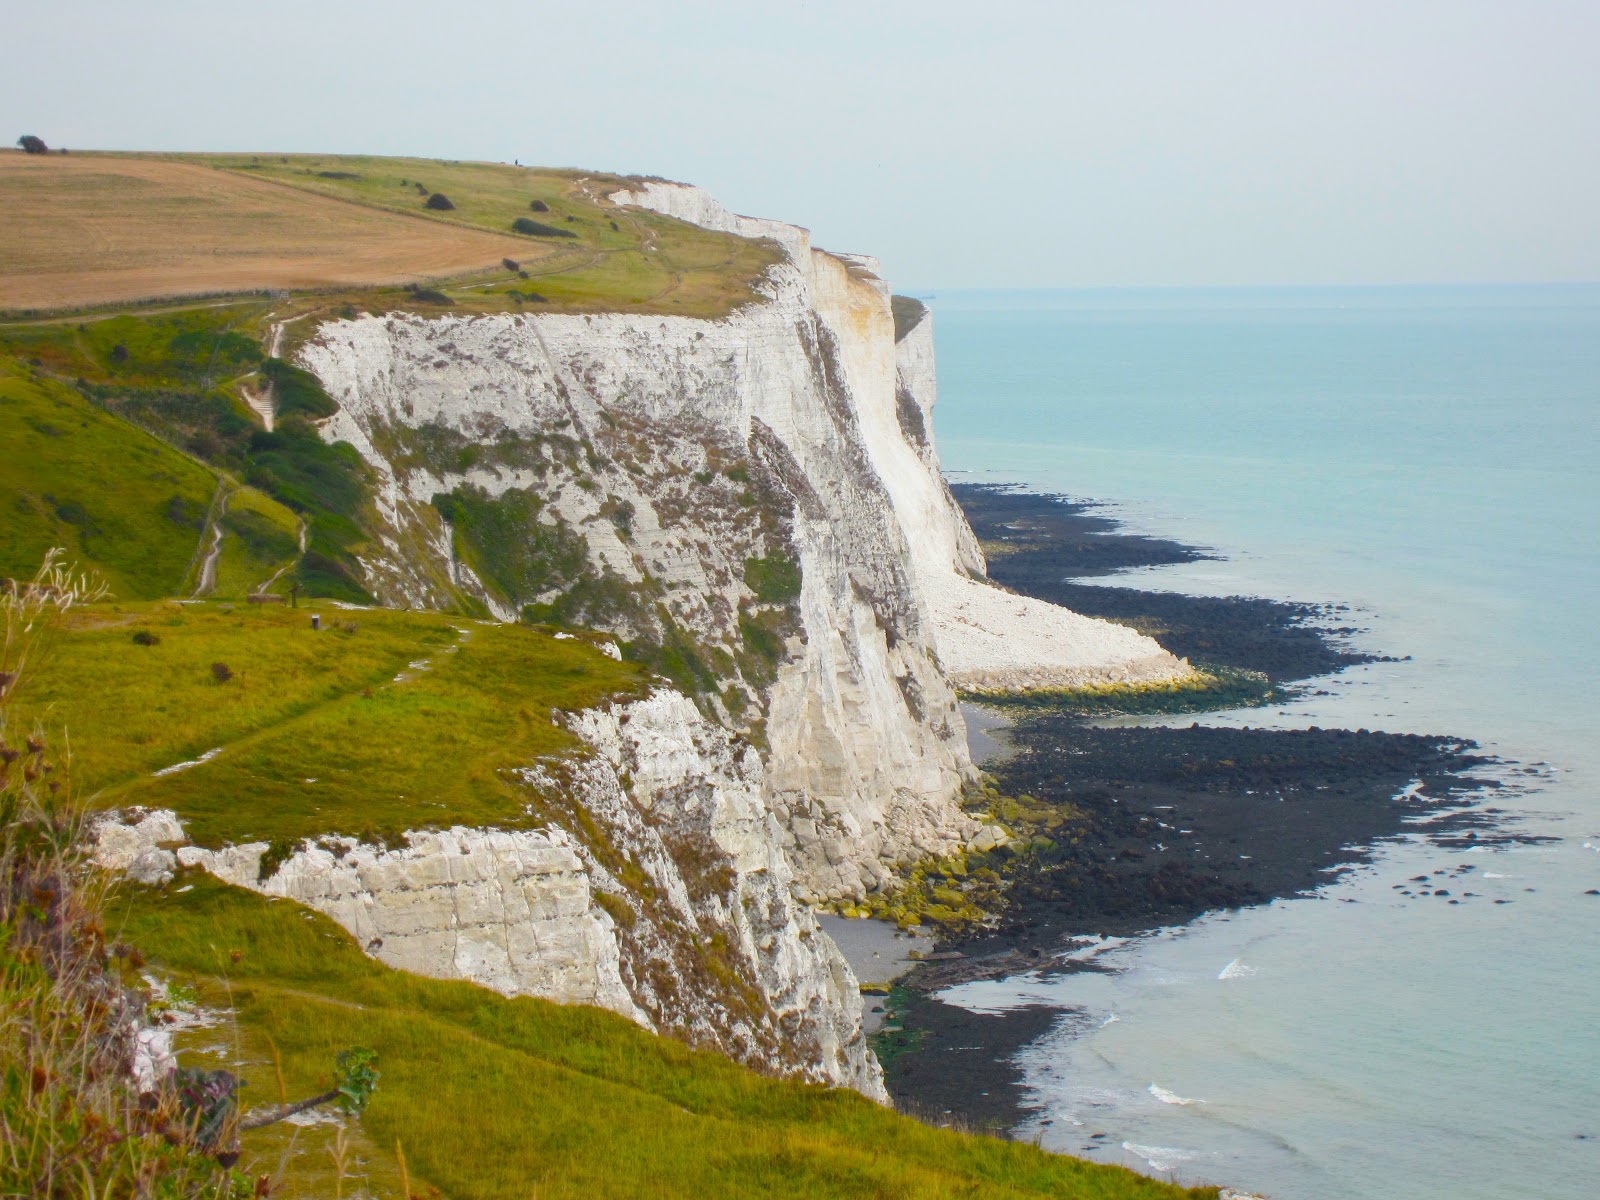 Rylea's Adventure in Europe: The White Cliffs of Dover